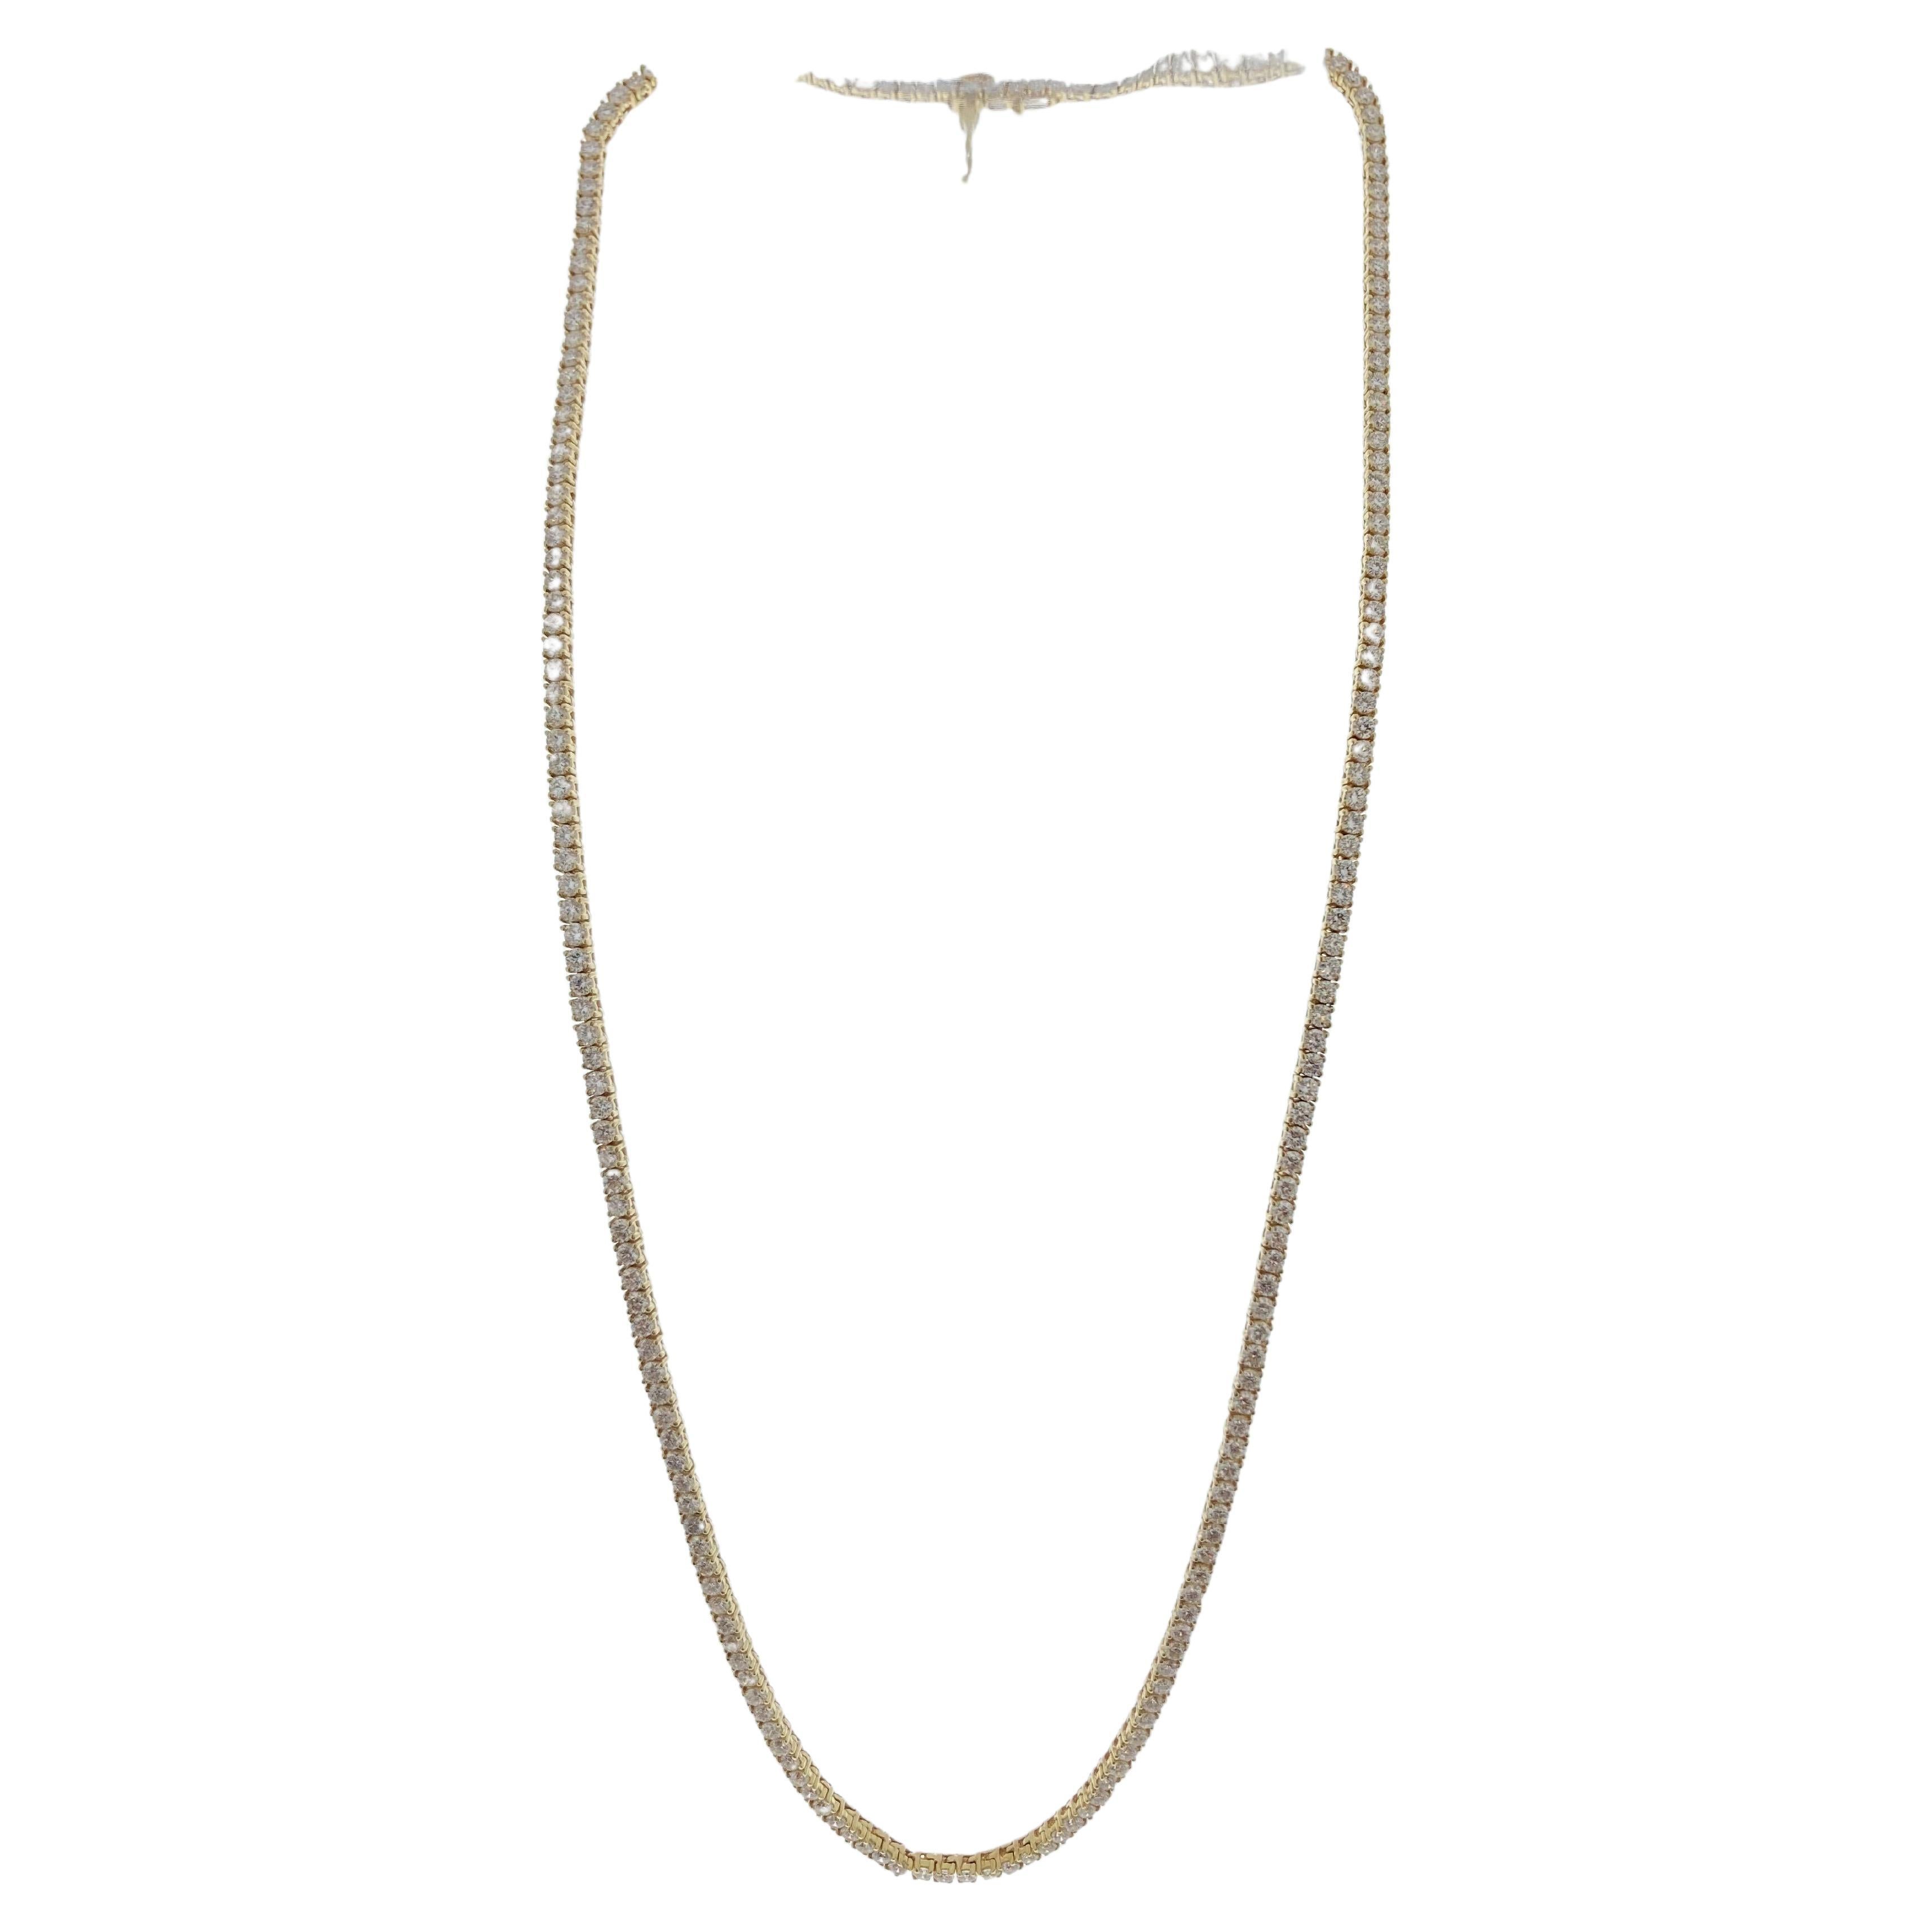 7.00 Carat Round Diamond Tennis Necklaces In 14k Yellow Gold For Sale